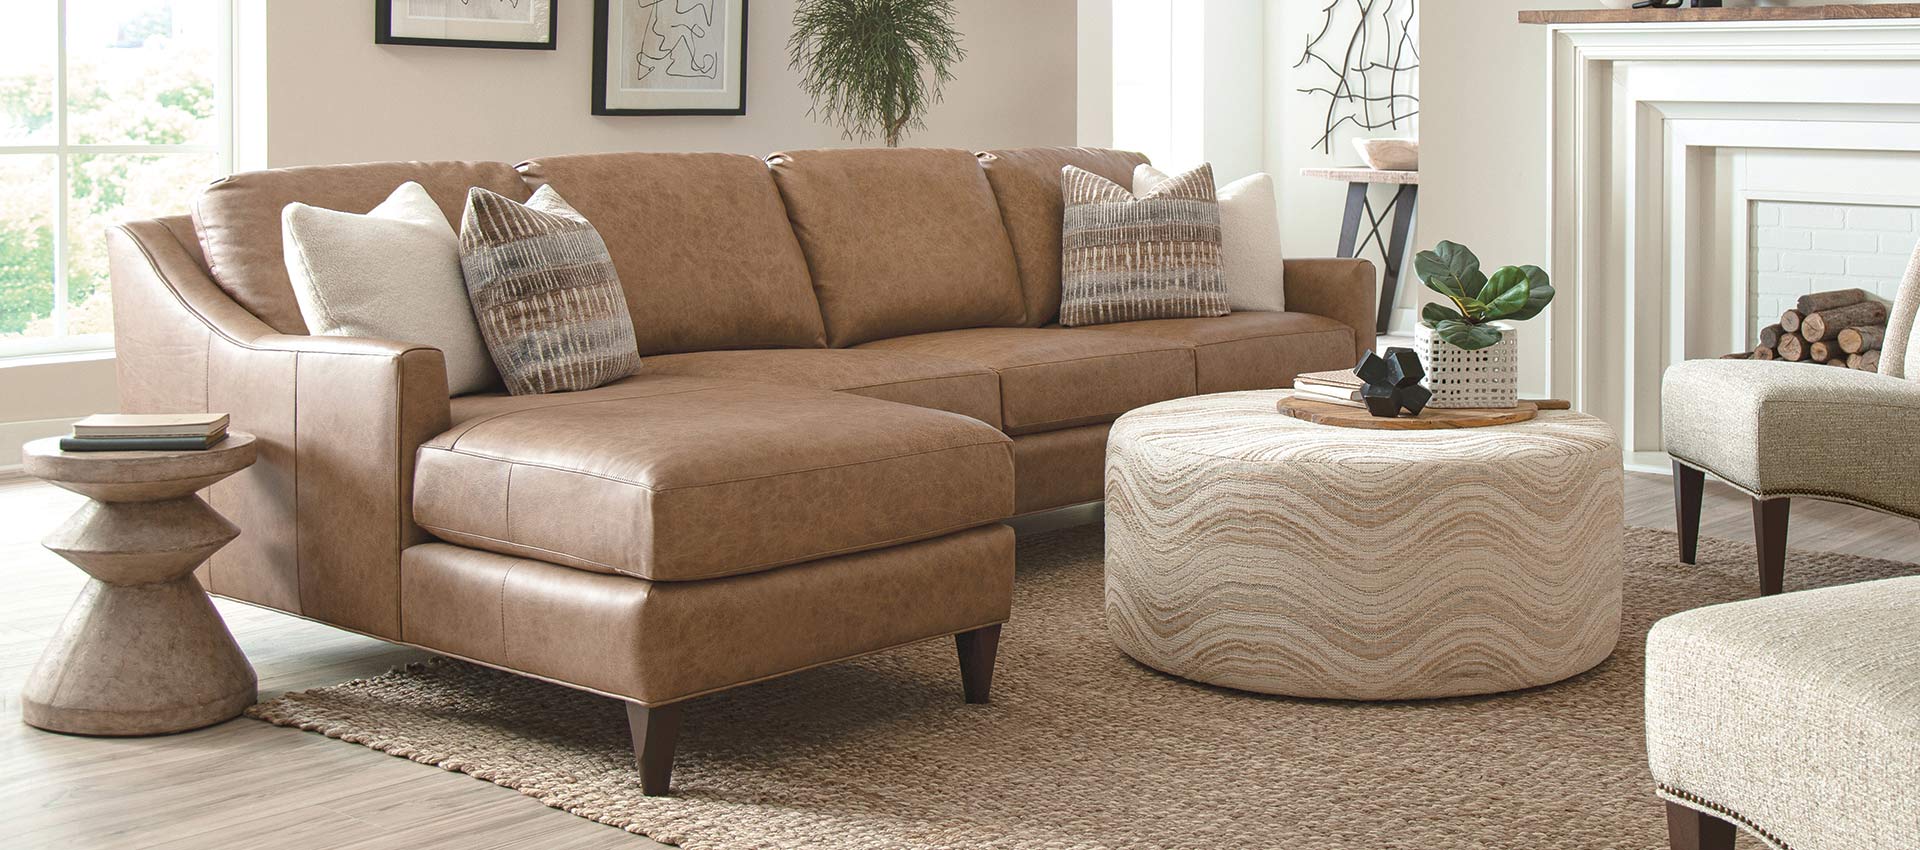 Smith Brothers Leather Sectional